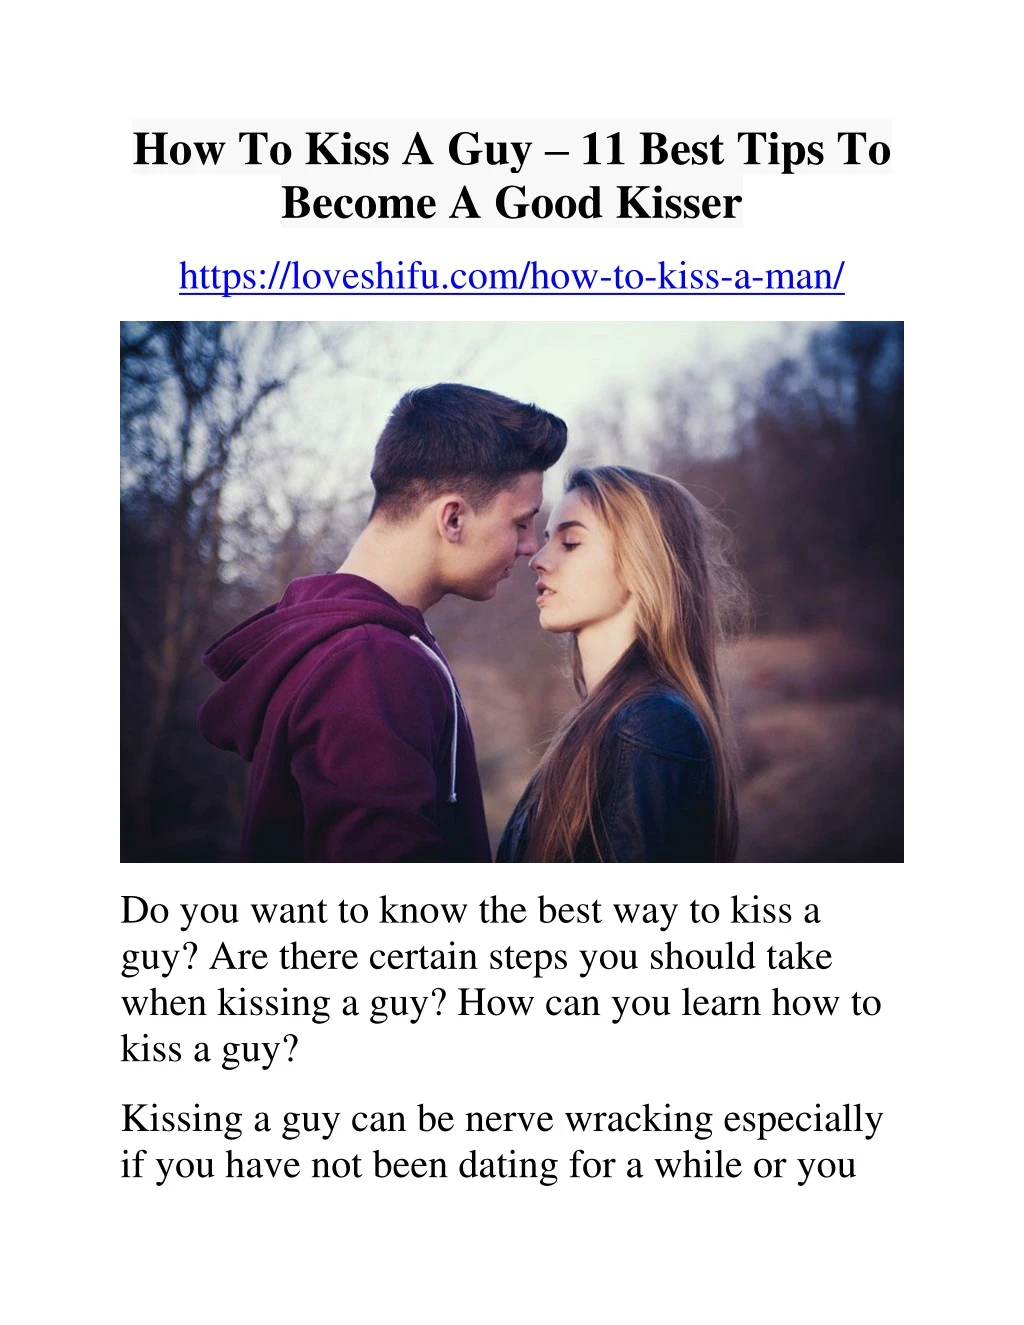 how to kiss a guy 11 best tips to become a good